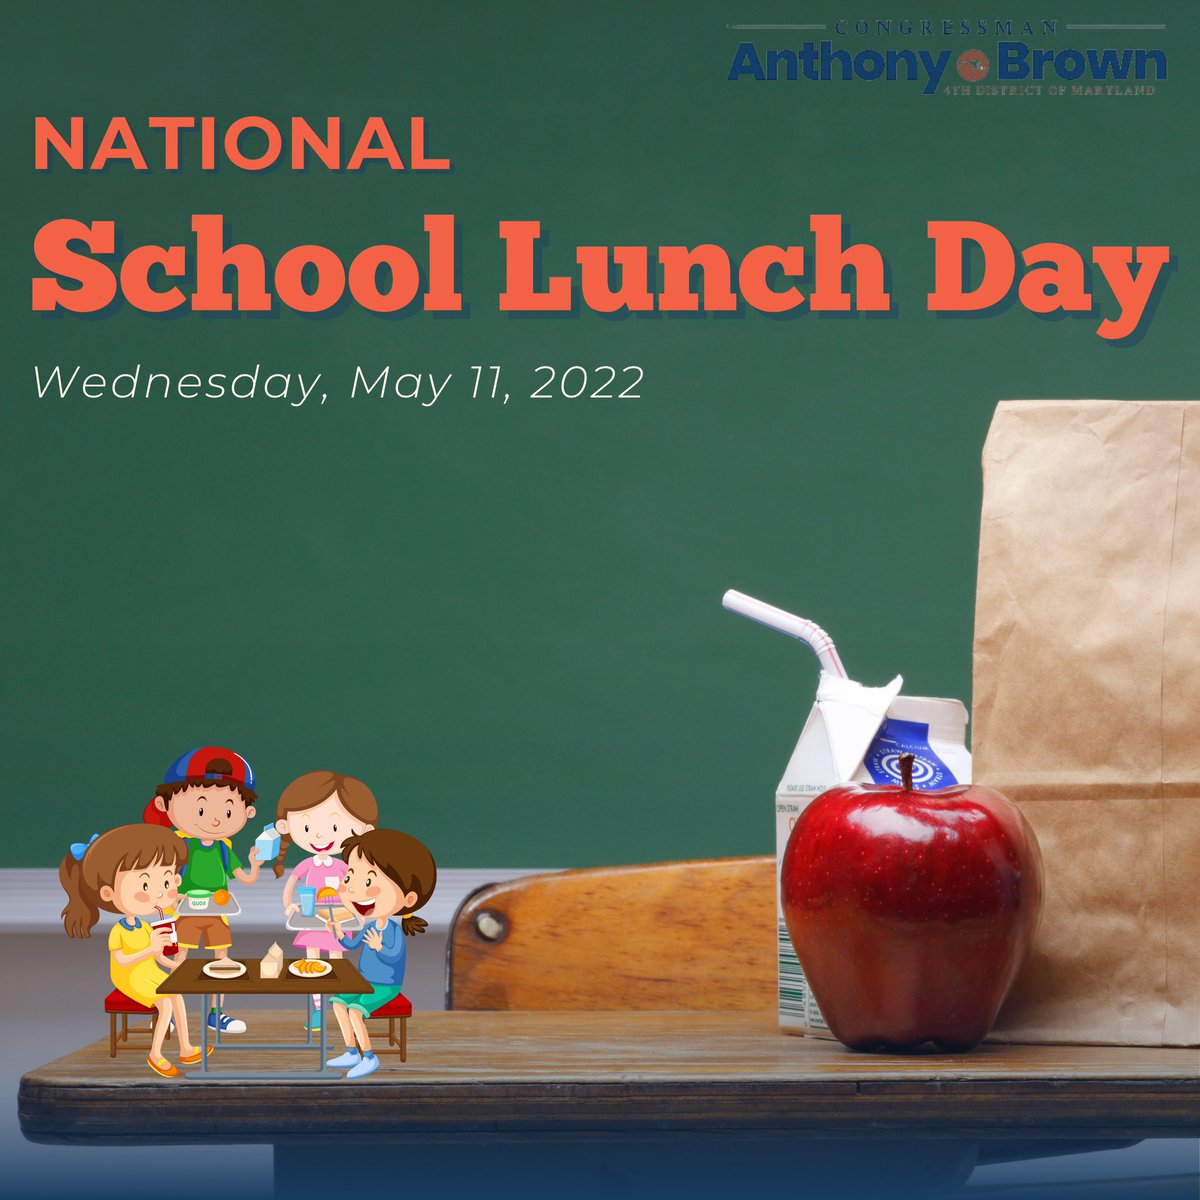 Today is National #SchoolLunchDay. 

Did you know that @PGCPS has one of the nation’s largest school districts, serving more than 136,500 students every academic school year? 

@AACountySchools serves more than 80,000 students every academic school year.